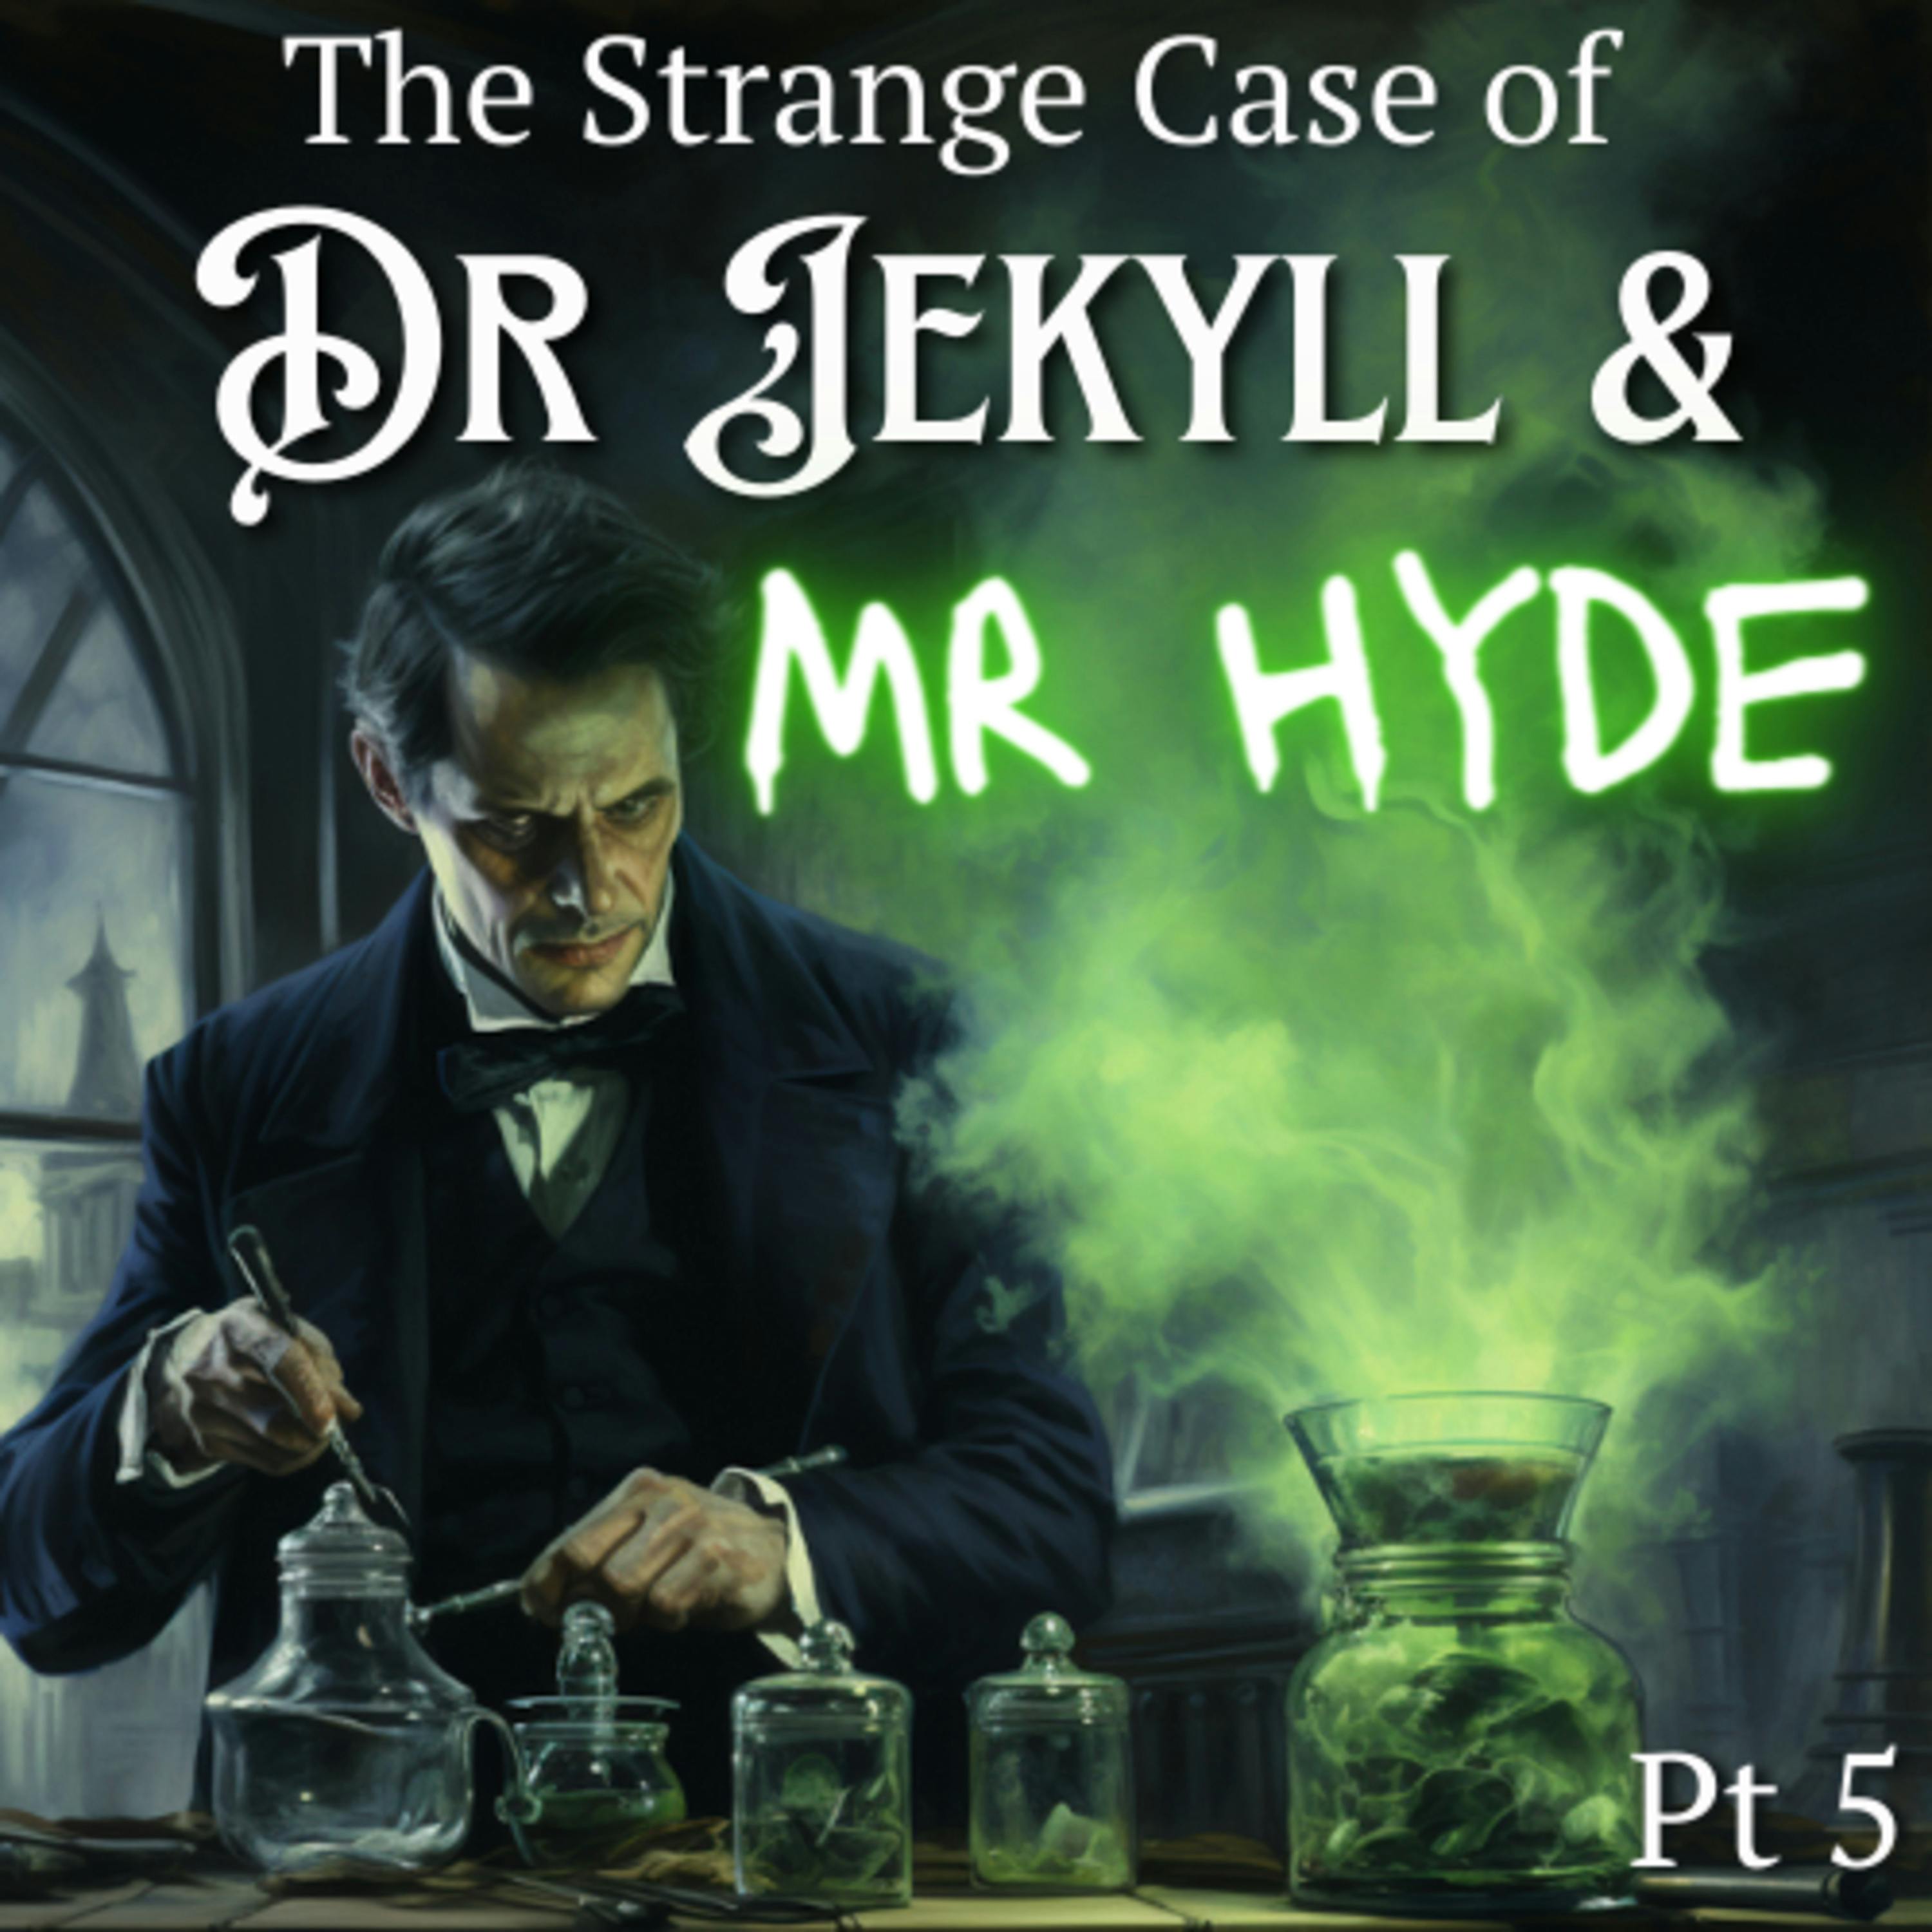 The Strange Case of Dr Jekyll and Mr Hyde Part 5